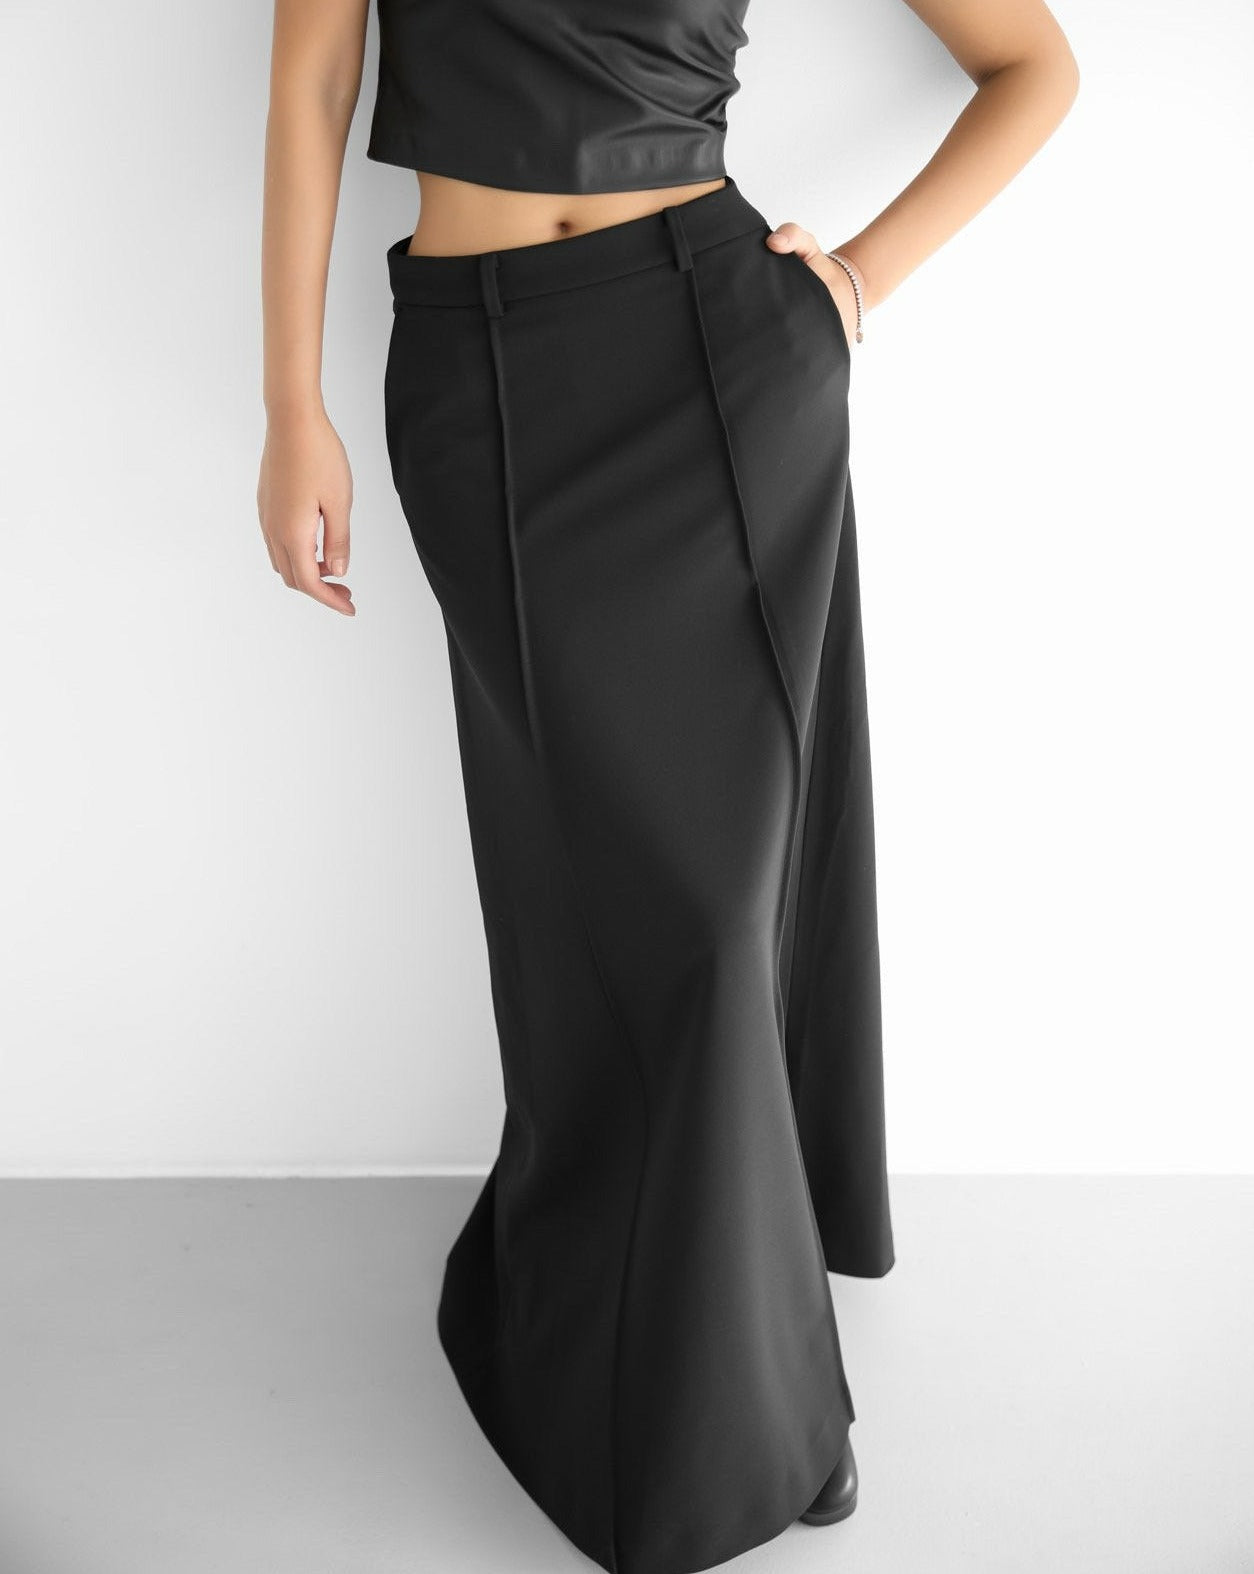 AW LEATHER PLATED FLARE SKIRT